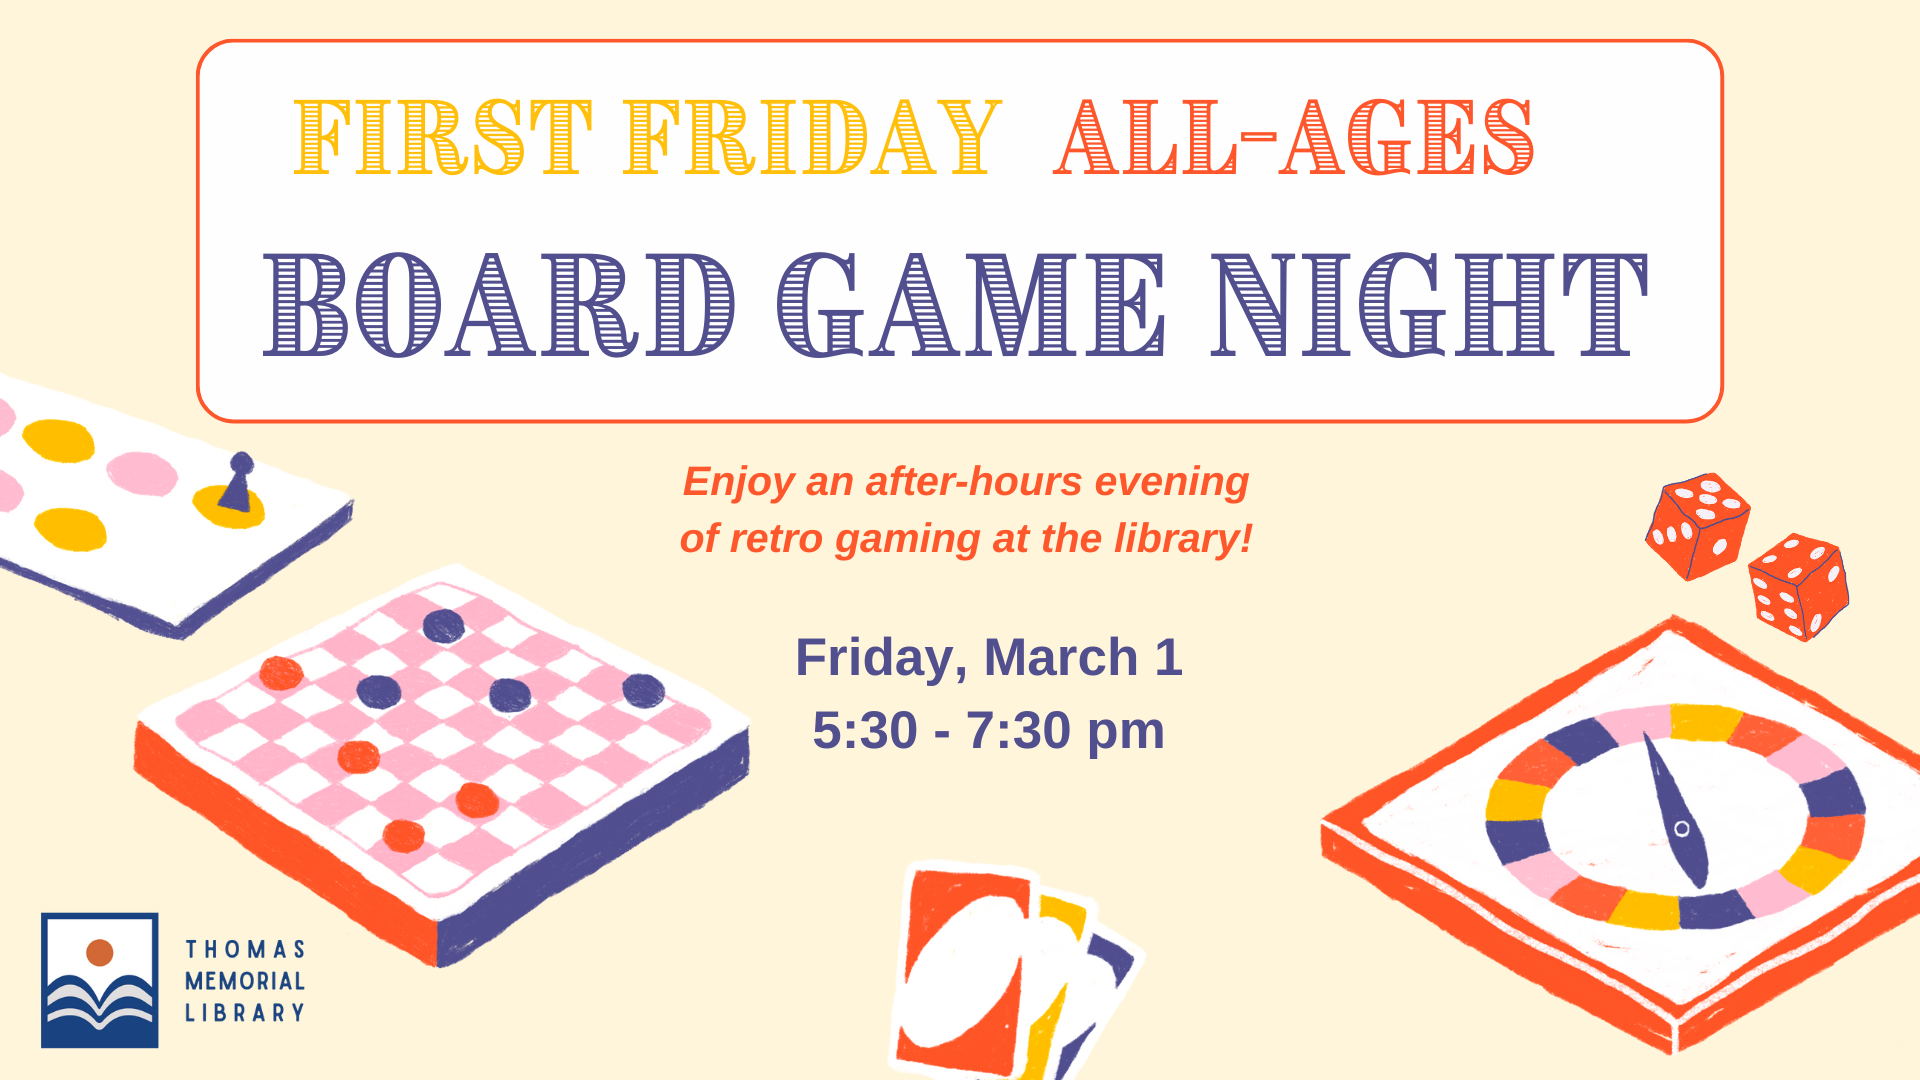 First Friday All Ages Board Game Night on Friday, March 1 at 5:30 p.m.